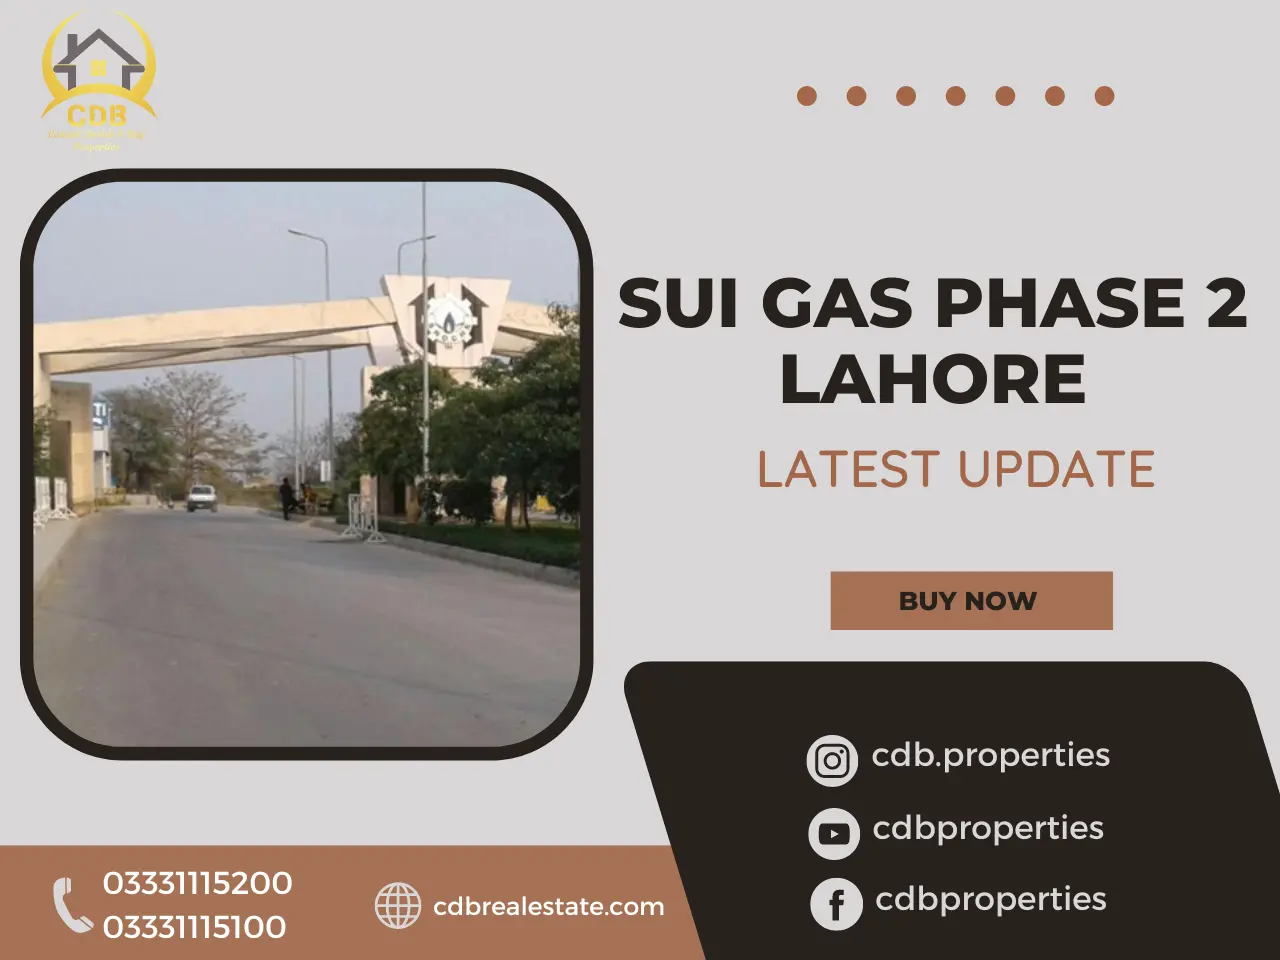 Sui Gas Phase 2 Lahore Latest Update